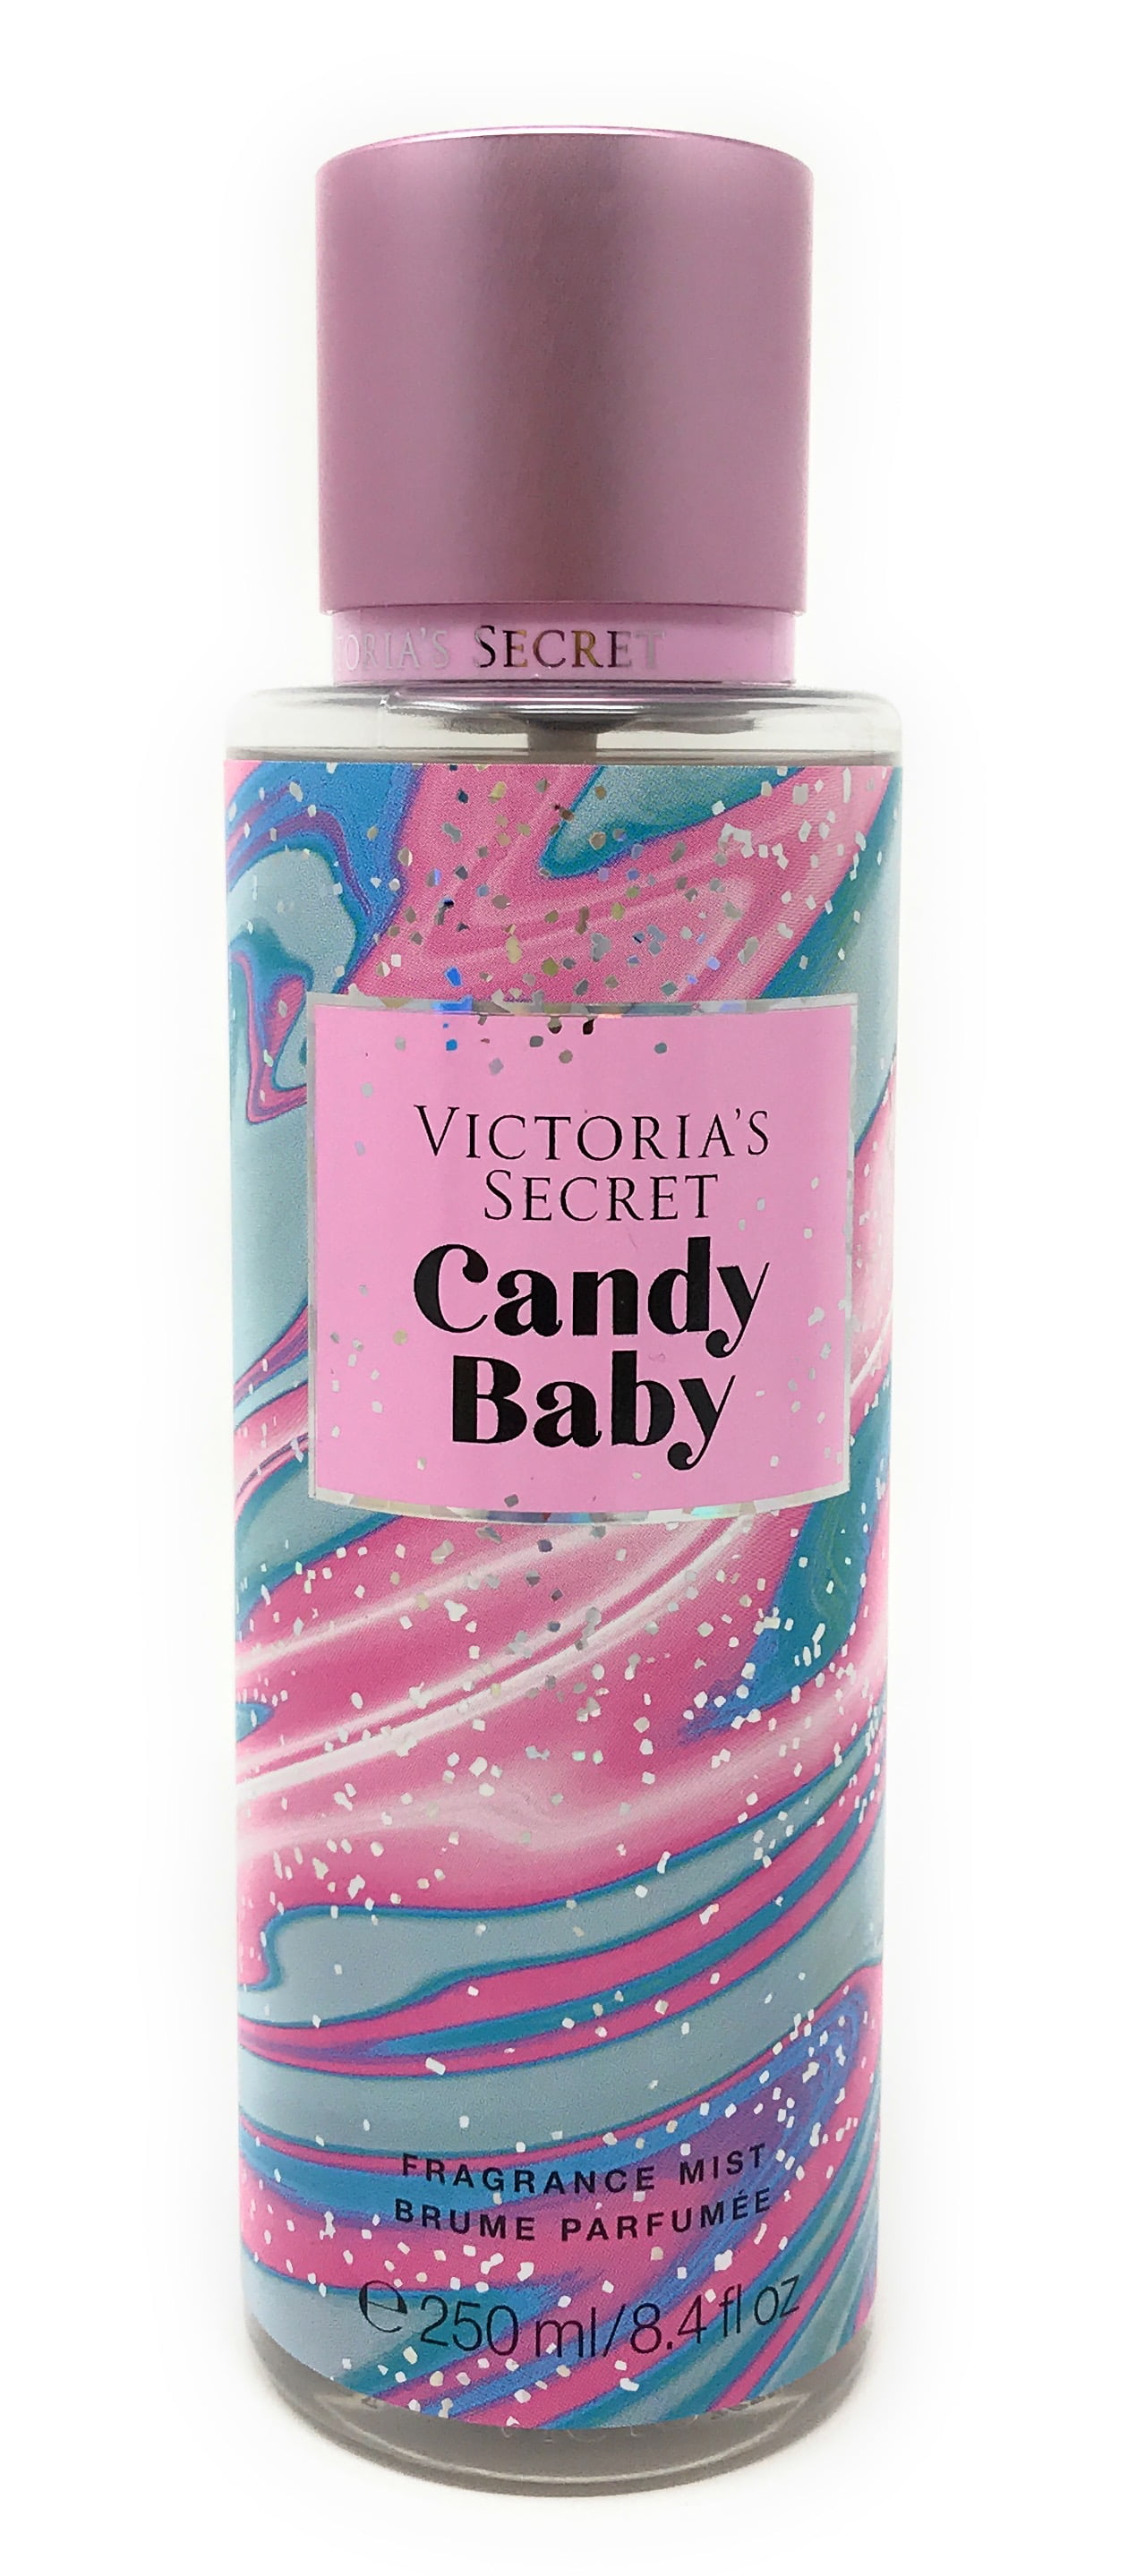 Victoria's Secret Candy Baby Fragrance 